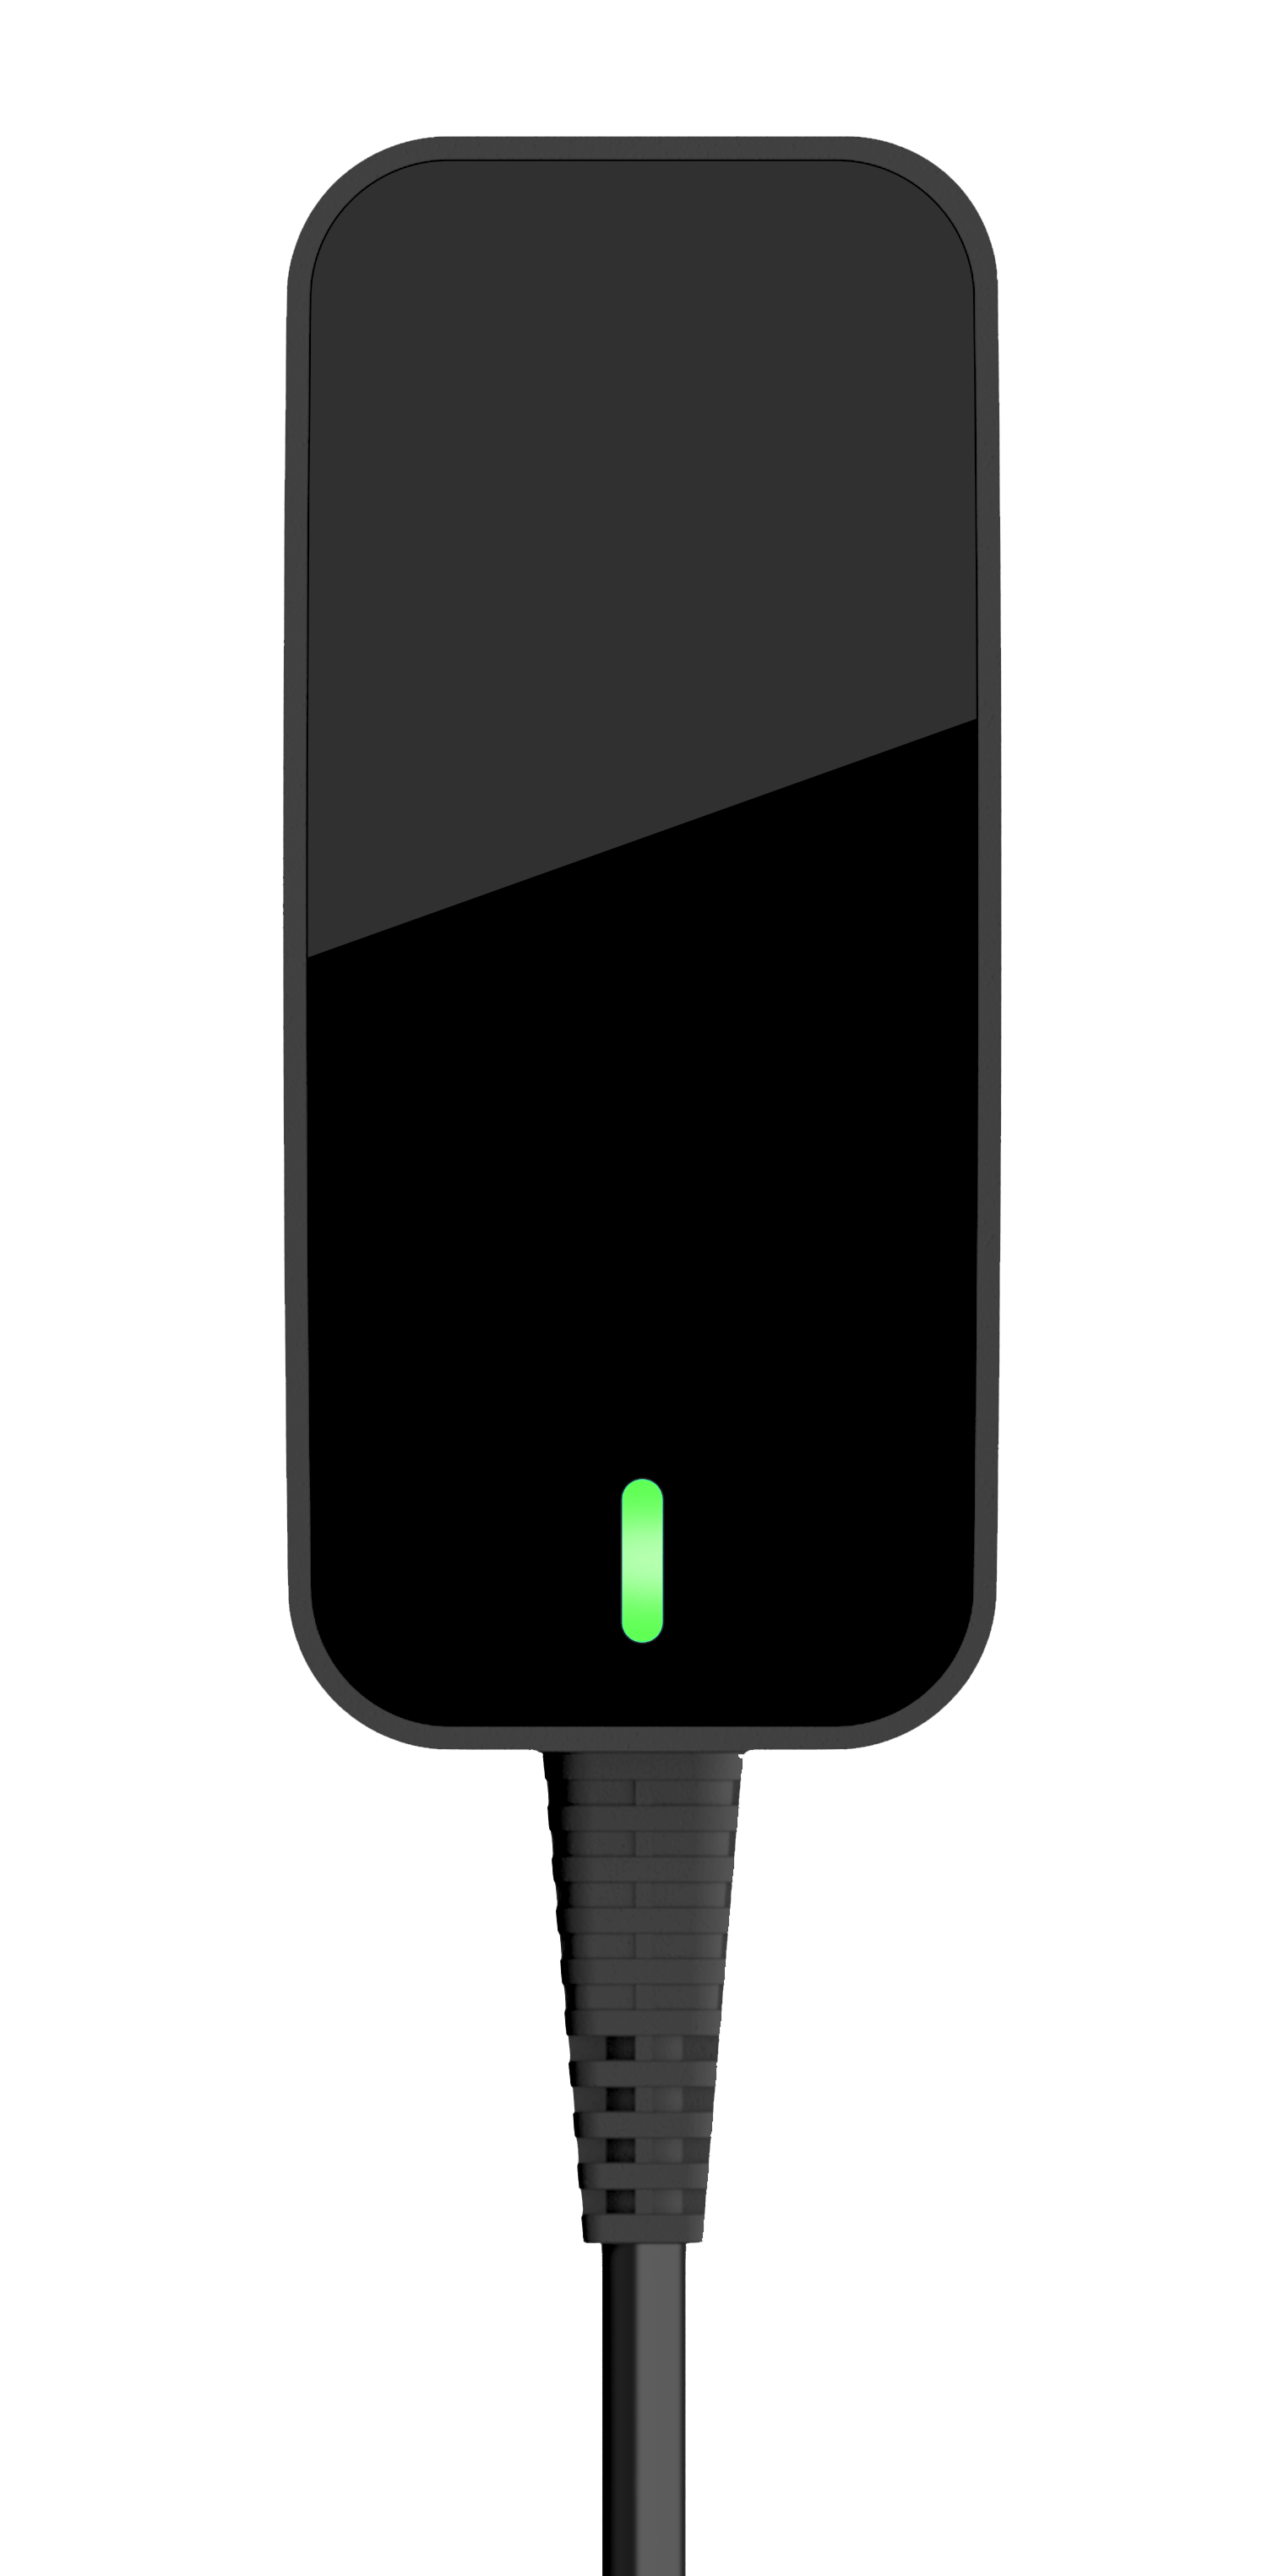 A black power supply charger with a green light on it.